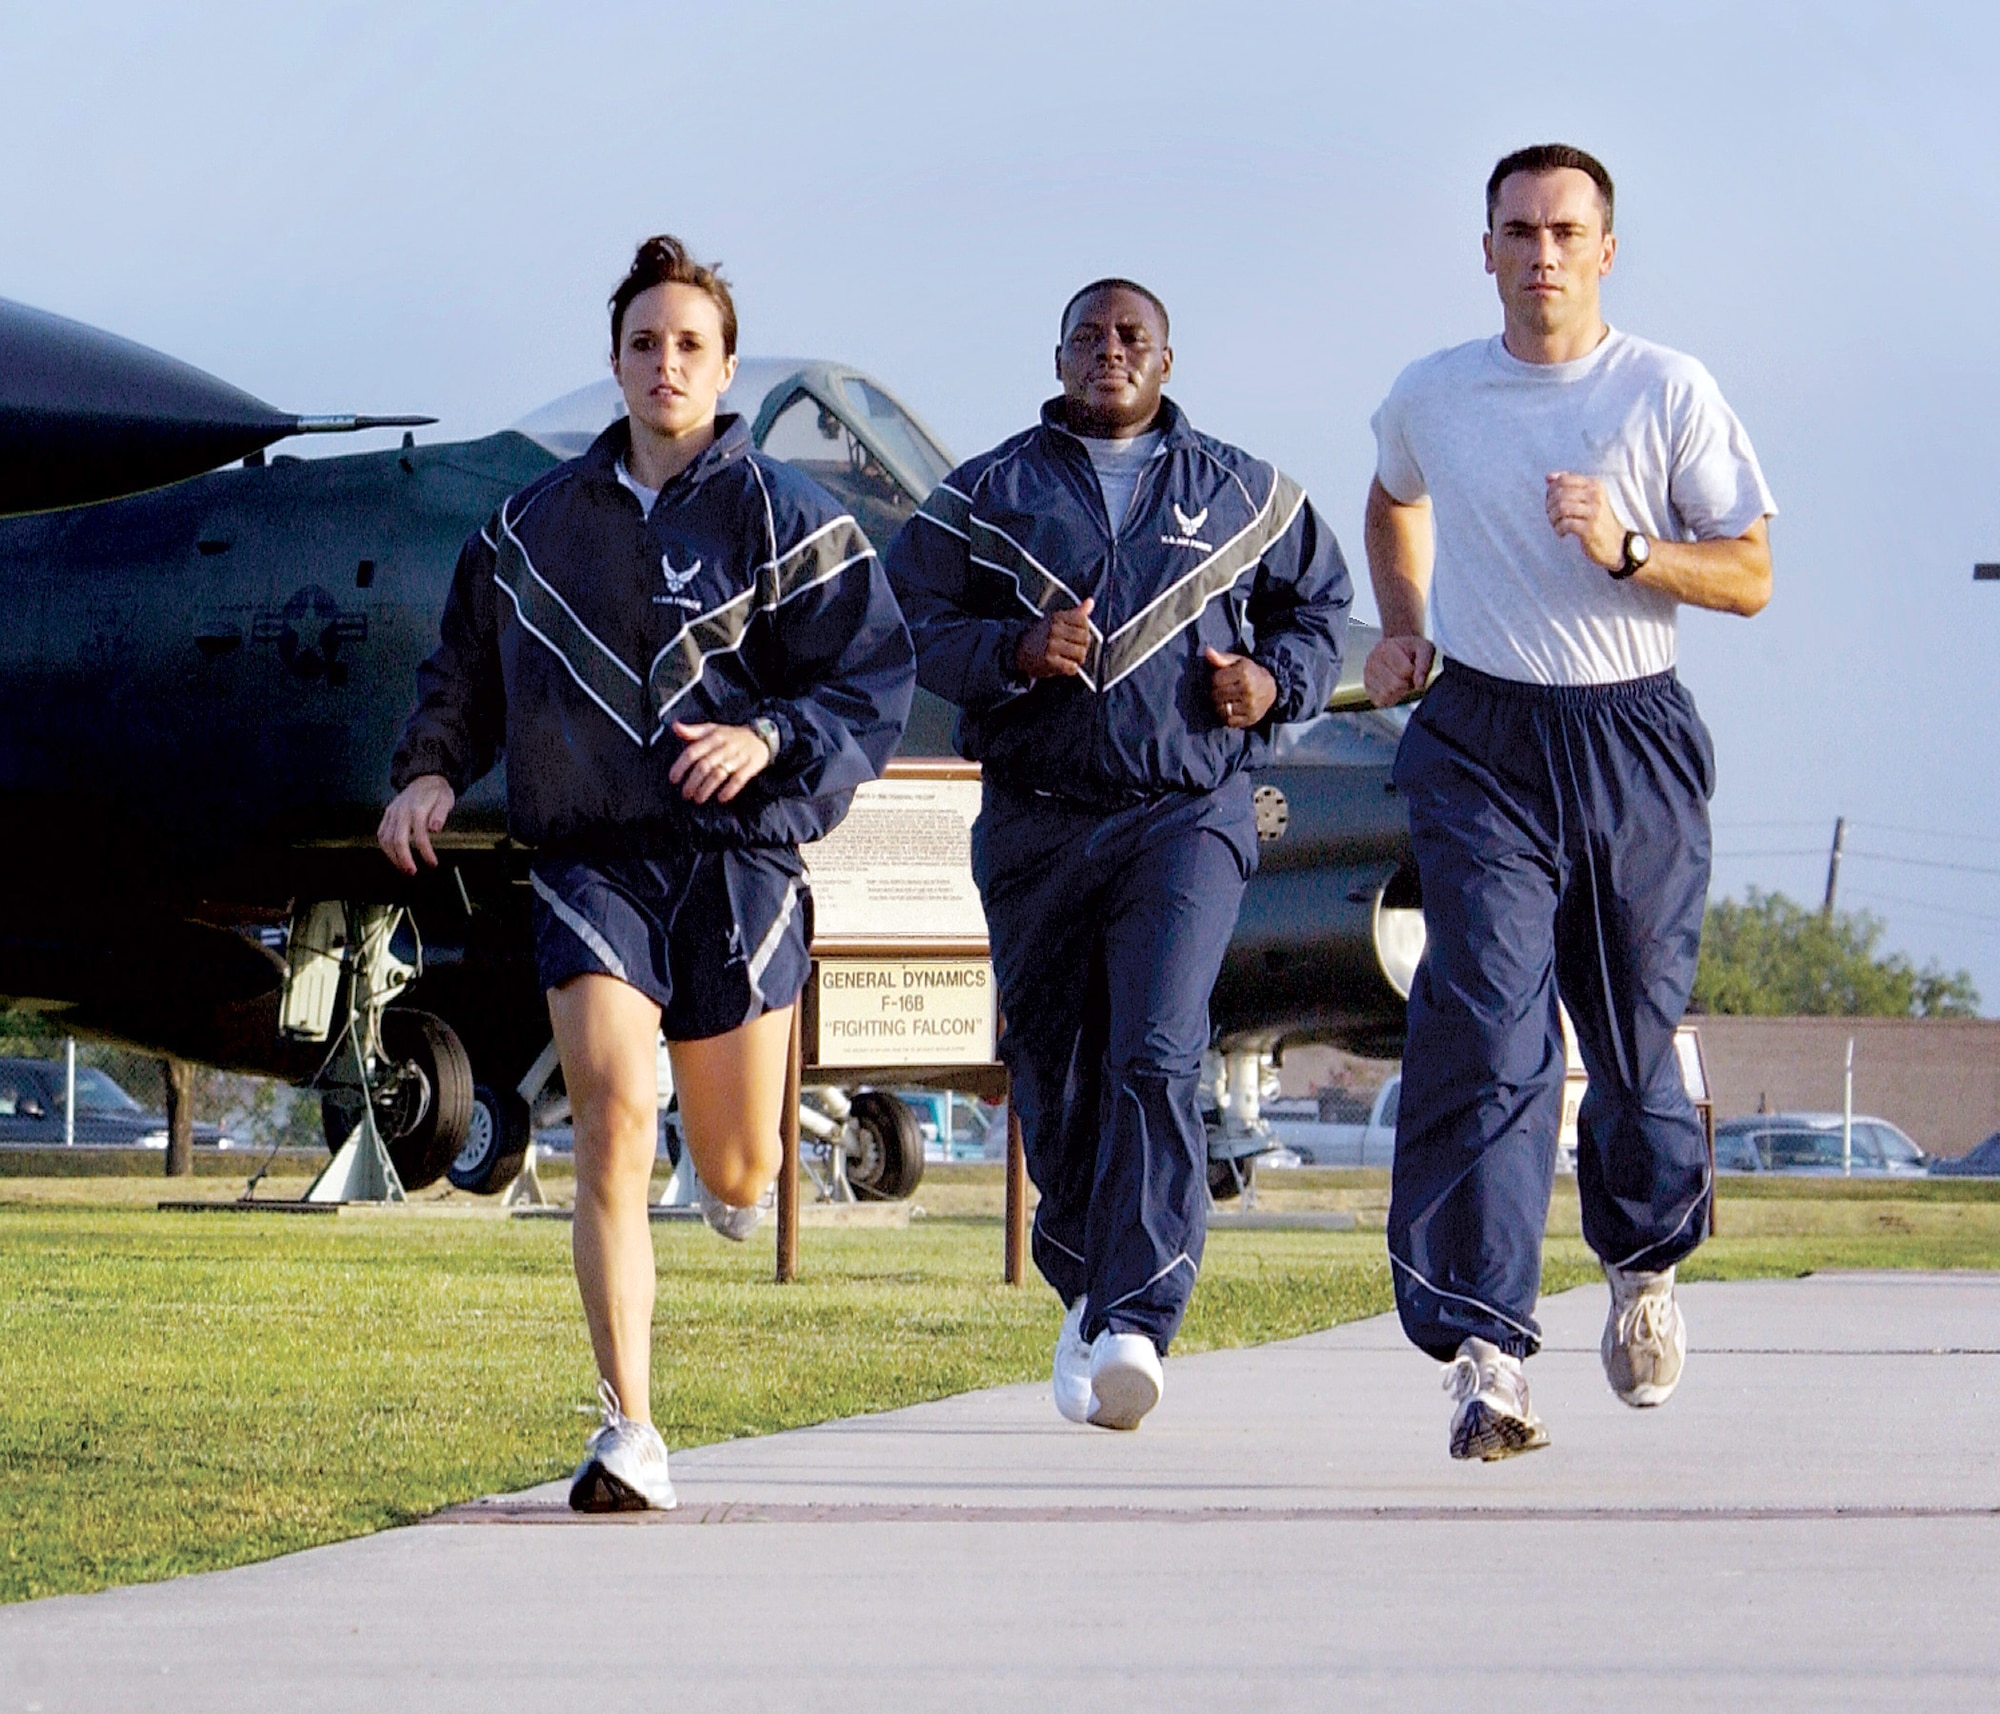 LACKLAND AIR FORCE BASE, Texas -- First Lt. Megan Schafer (from left), Staff Sgt. Antwain Wright and Master Sgt. Scott Wagers show off different combinations of the new physical training uniform while jogging here during the wear-test phase.  The new uniform will be issued to Airmen serving in Southwest Asia first and phased into the rest of the force over the next three years.  (U.S. Air Force photo by Master Sgt. Efrain Gonzalez)